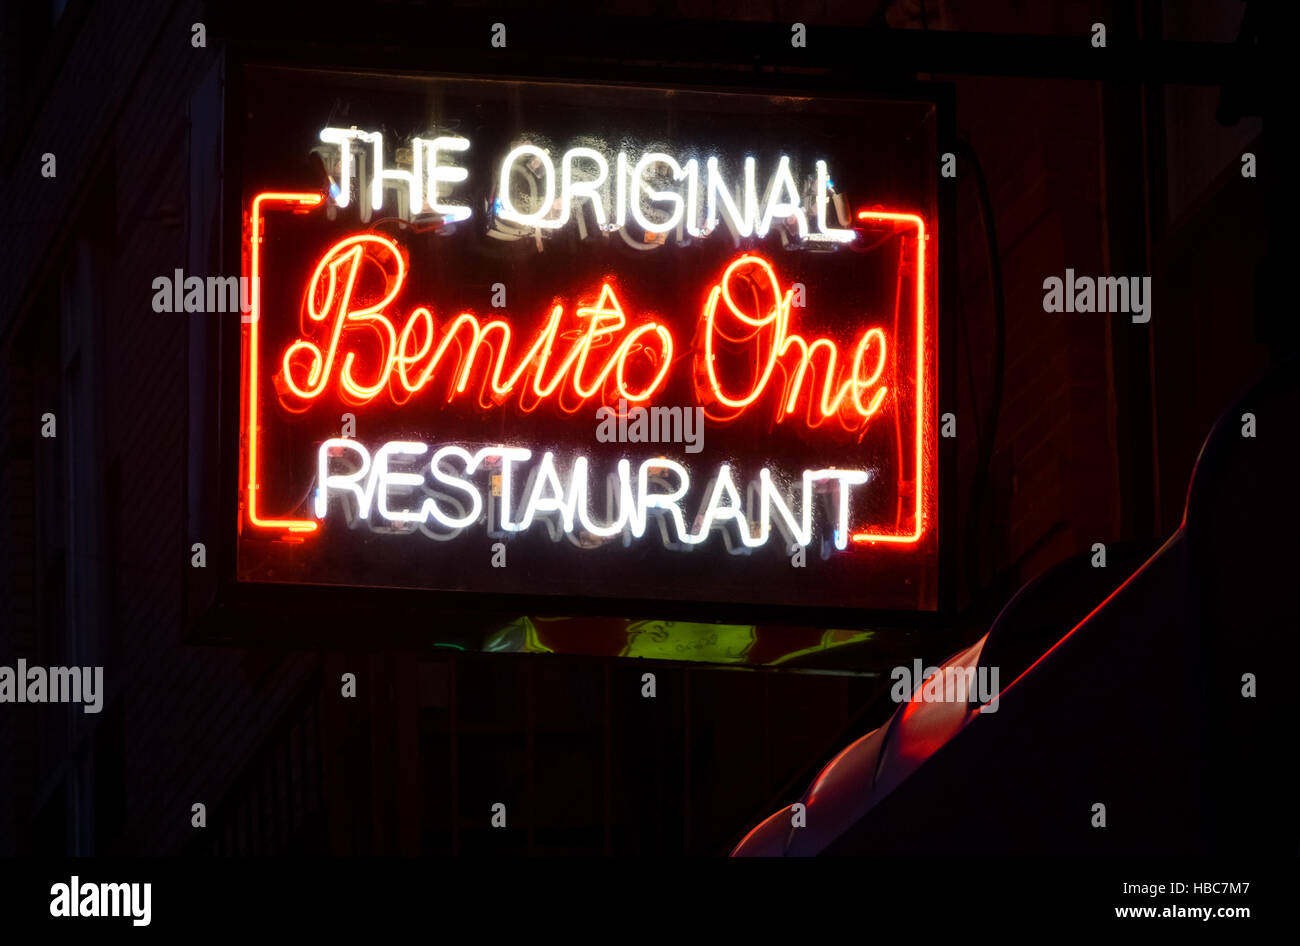 Neon sign outside The Original Benito One, an Italian restaurant on Mulberry Street in Little Italy in New York City Stock Photo